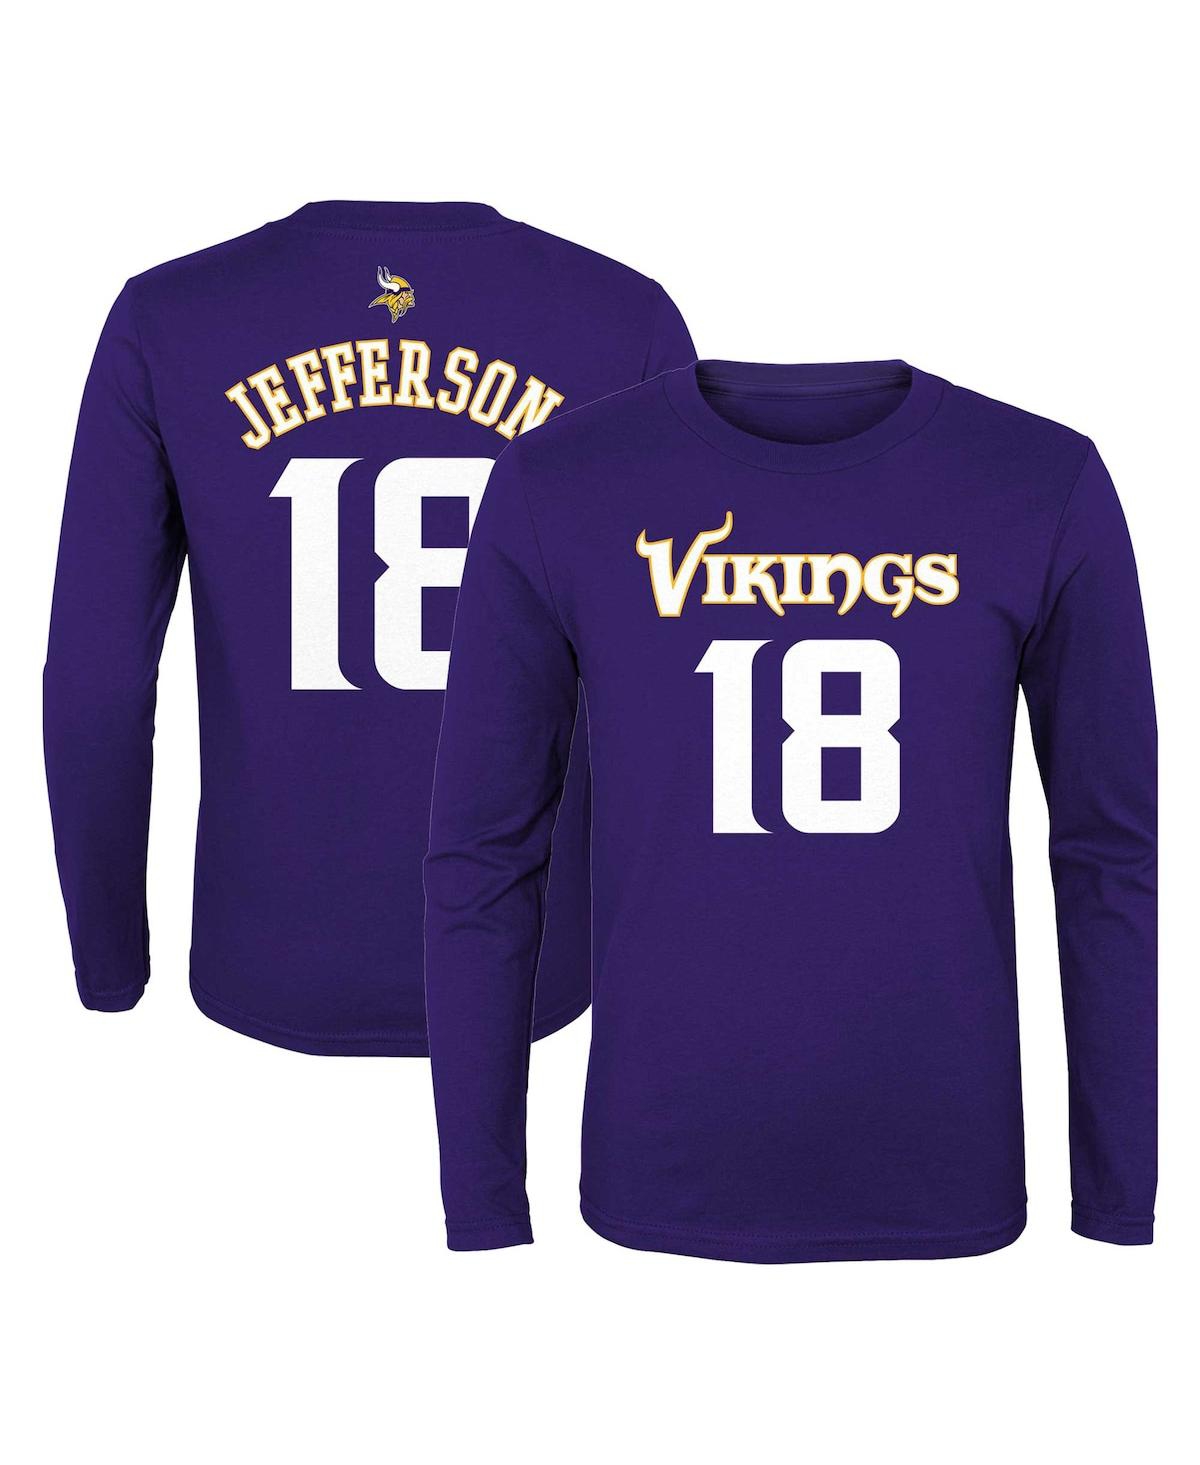 Outerstuff Kids' Big Boys Justin Jefferson Purple Minnesota Vikings Mainliner Player Name And Number Long Sleeve T-sh